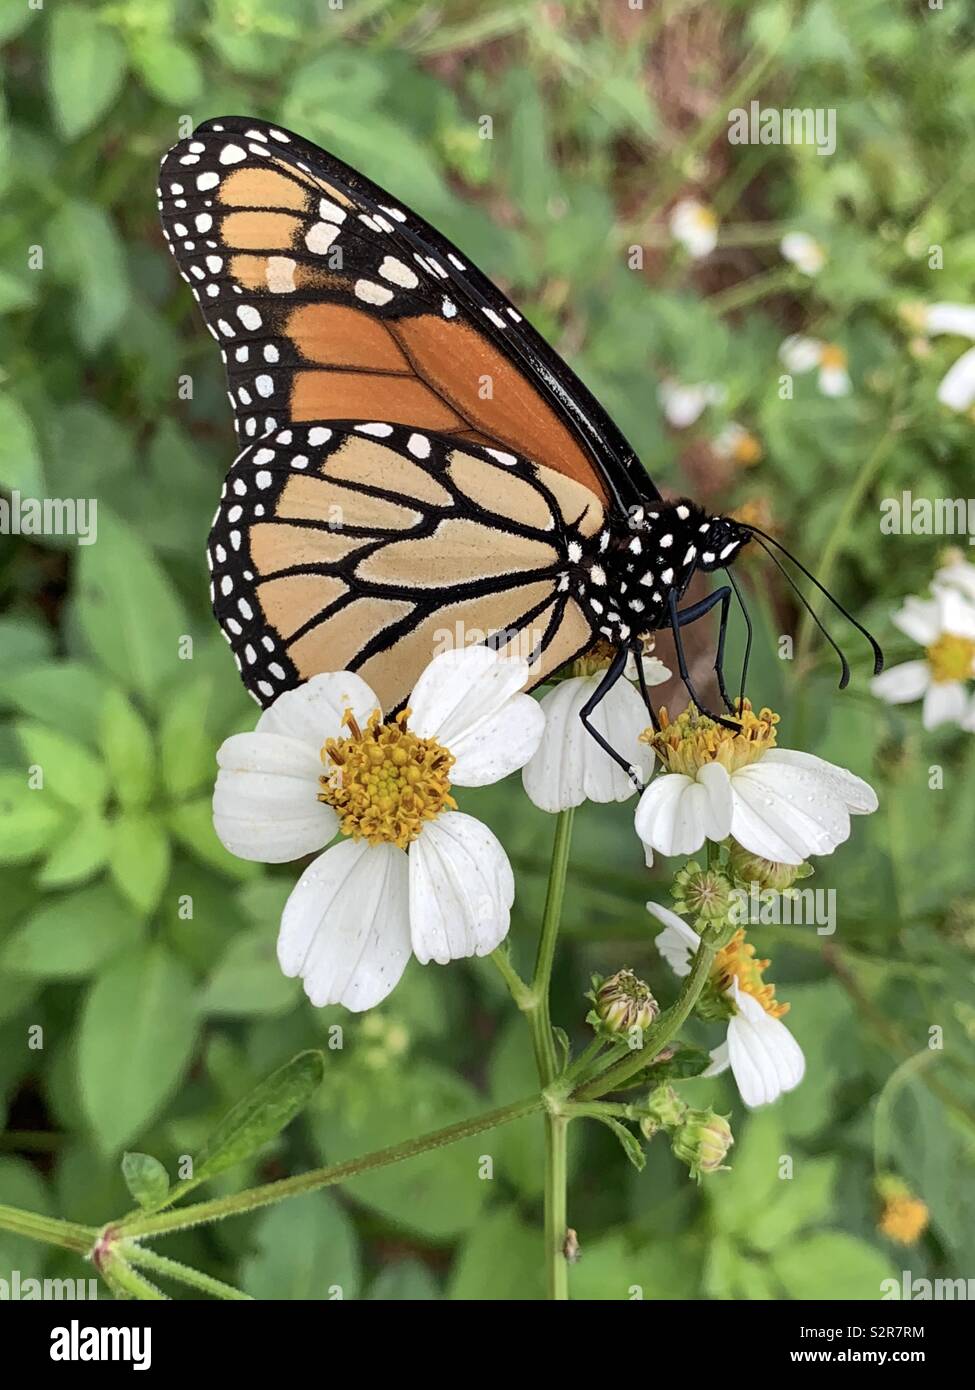 Closeup of monarch butterfly on daisy flower Stock Photo